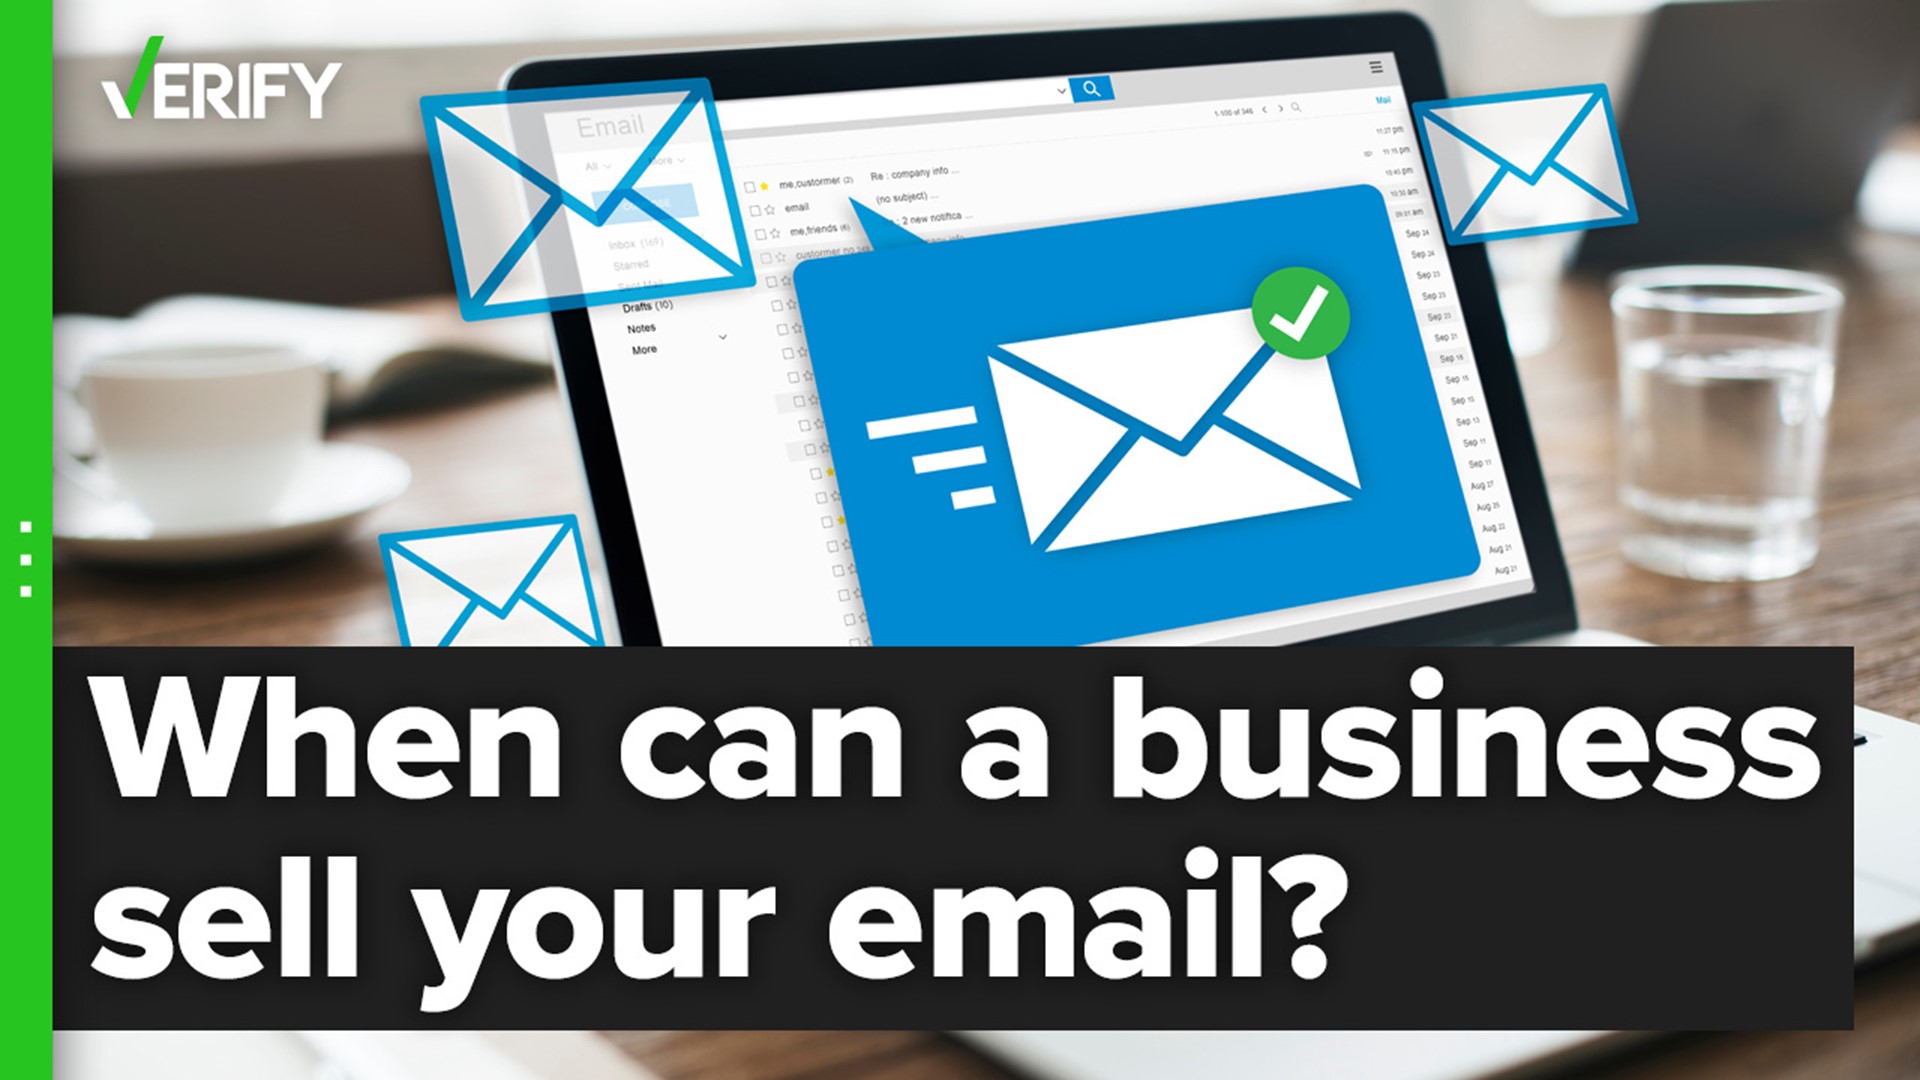 The CAN-SPAM Act prohibits businesses that send commercial emails from selling an email address after a person has requested to opt out of receiving future emails.